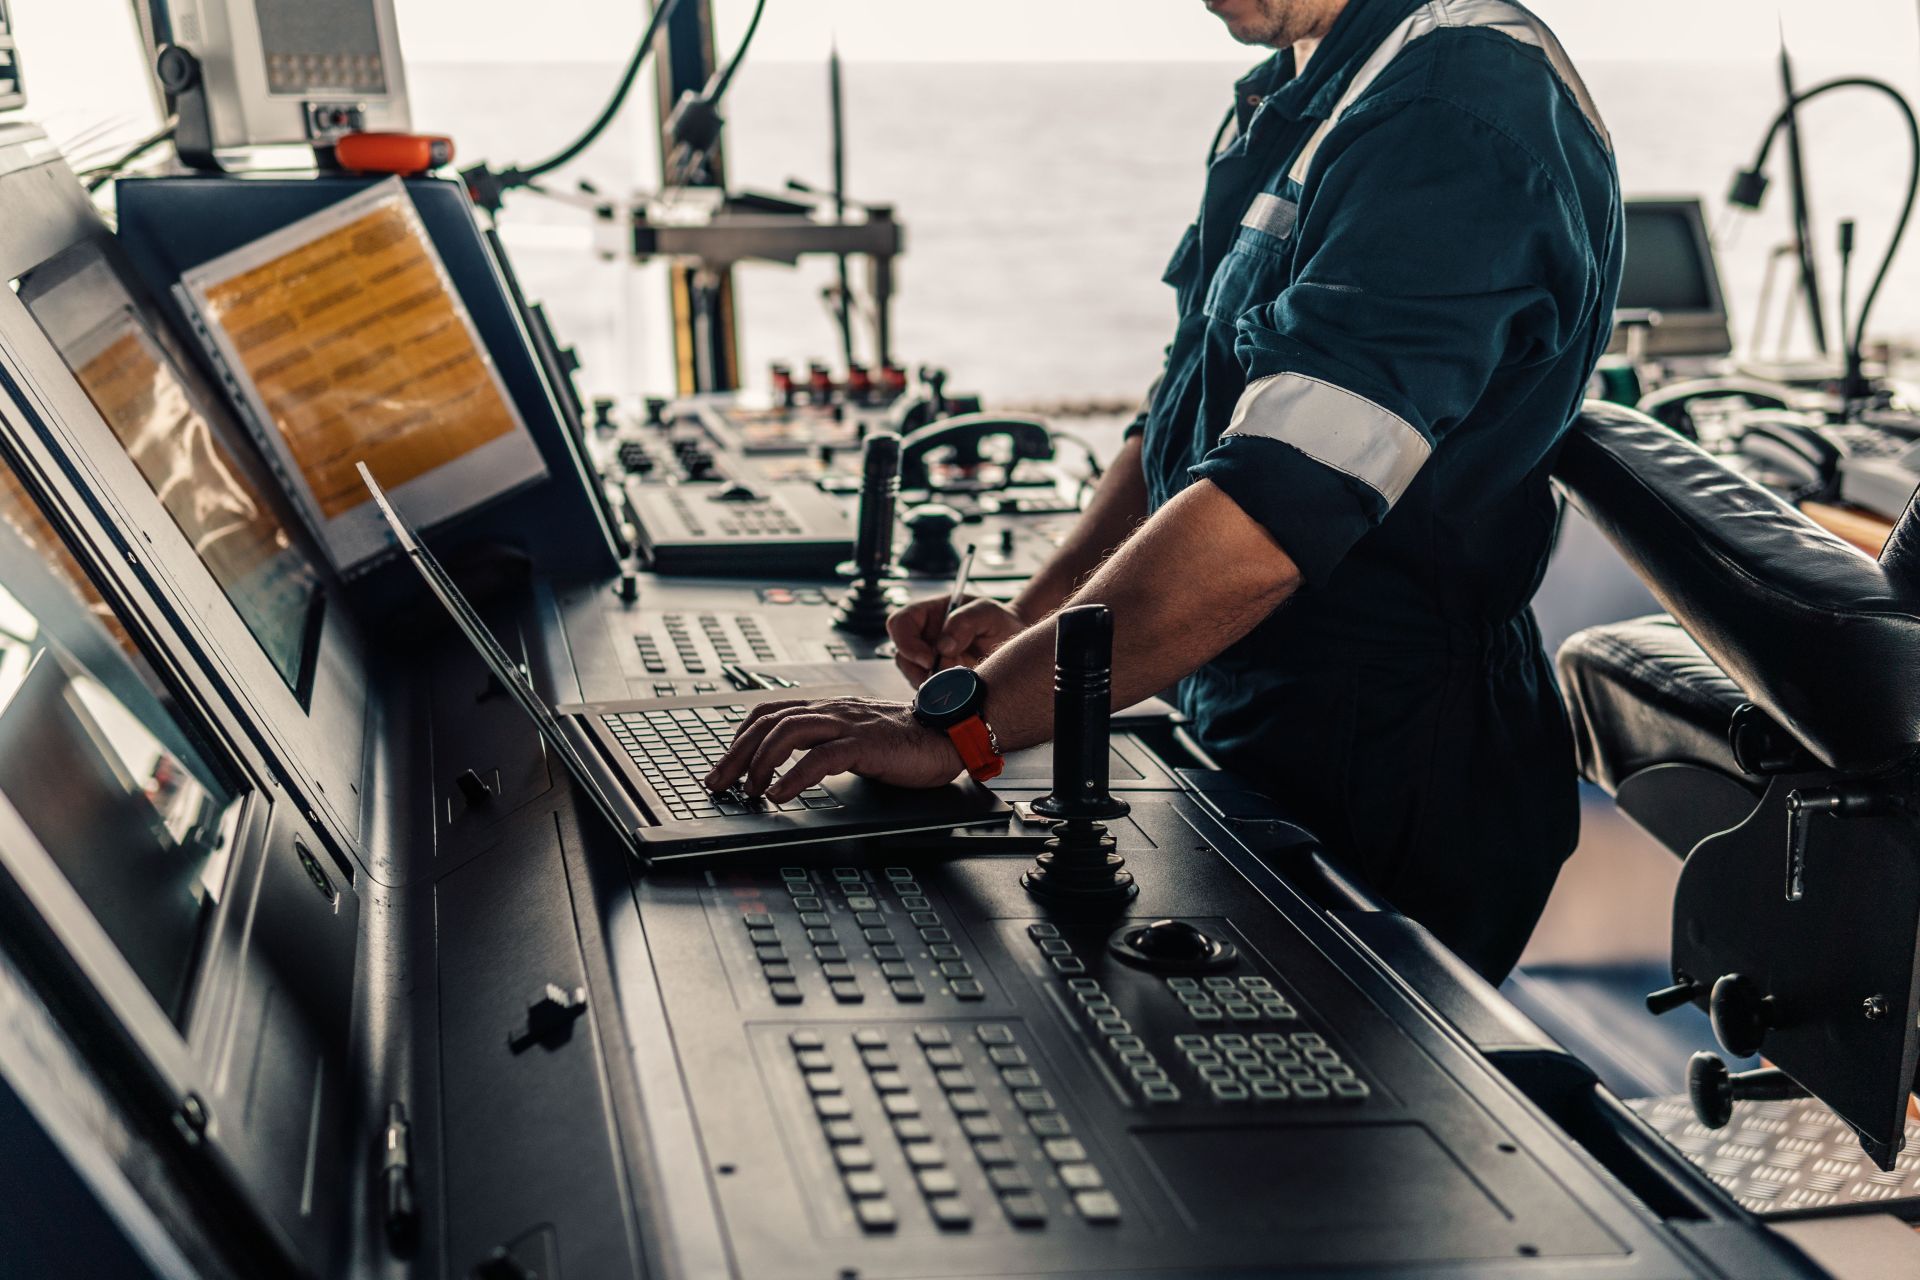 A maritime professional expertly navigating ship operations on a laptop, representing Maritime Trainer's Retain Solutions.